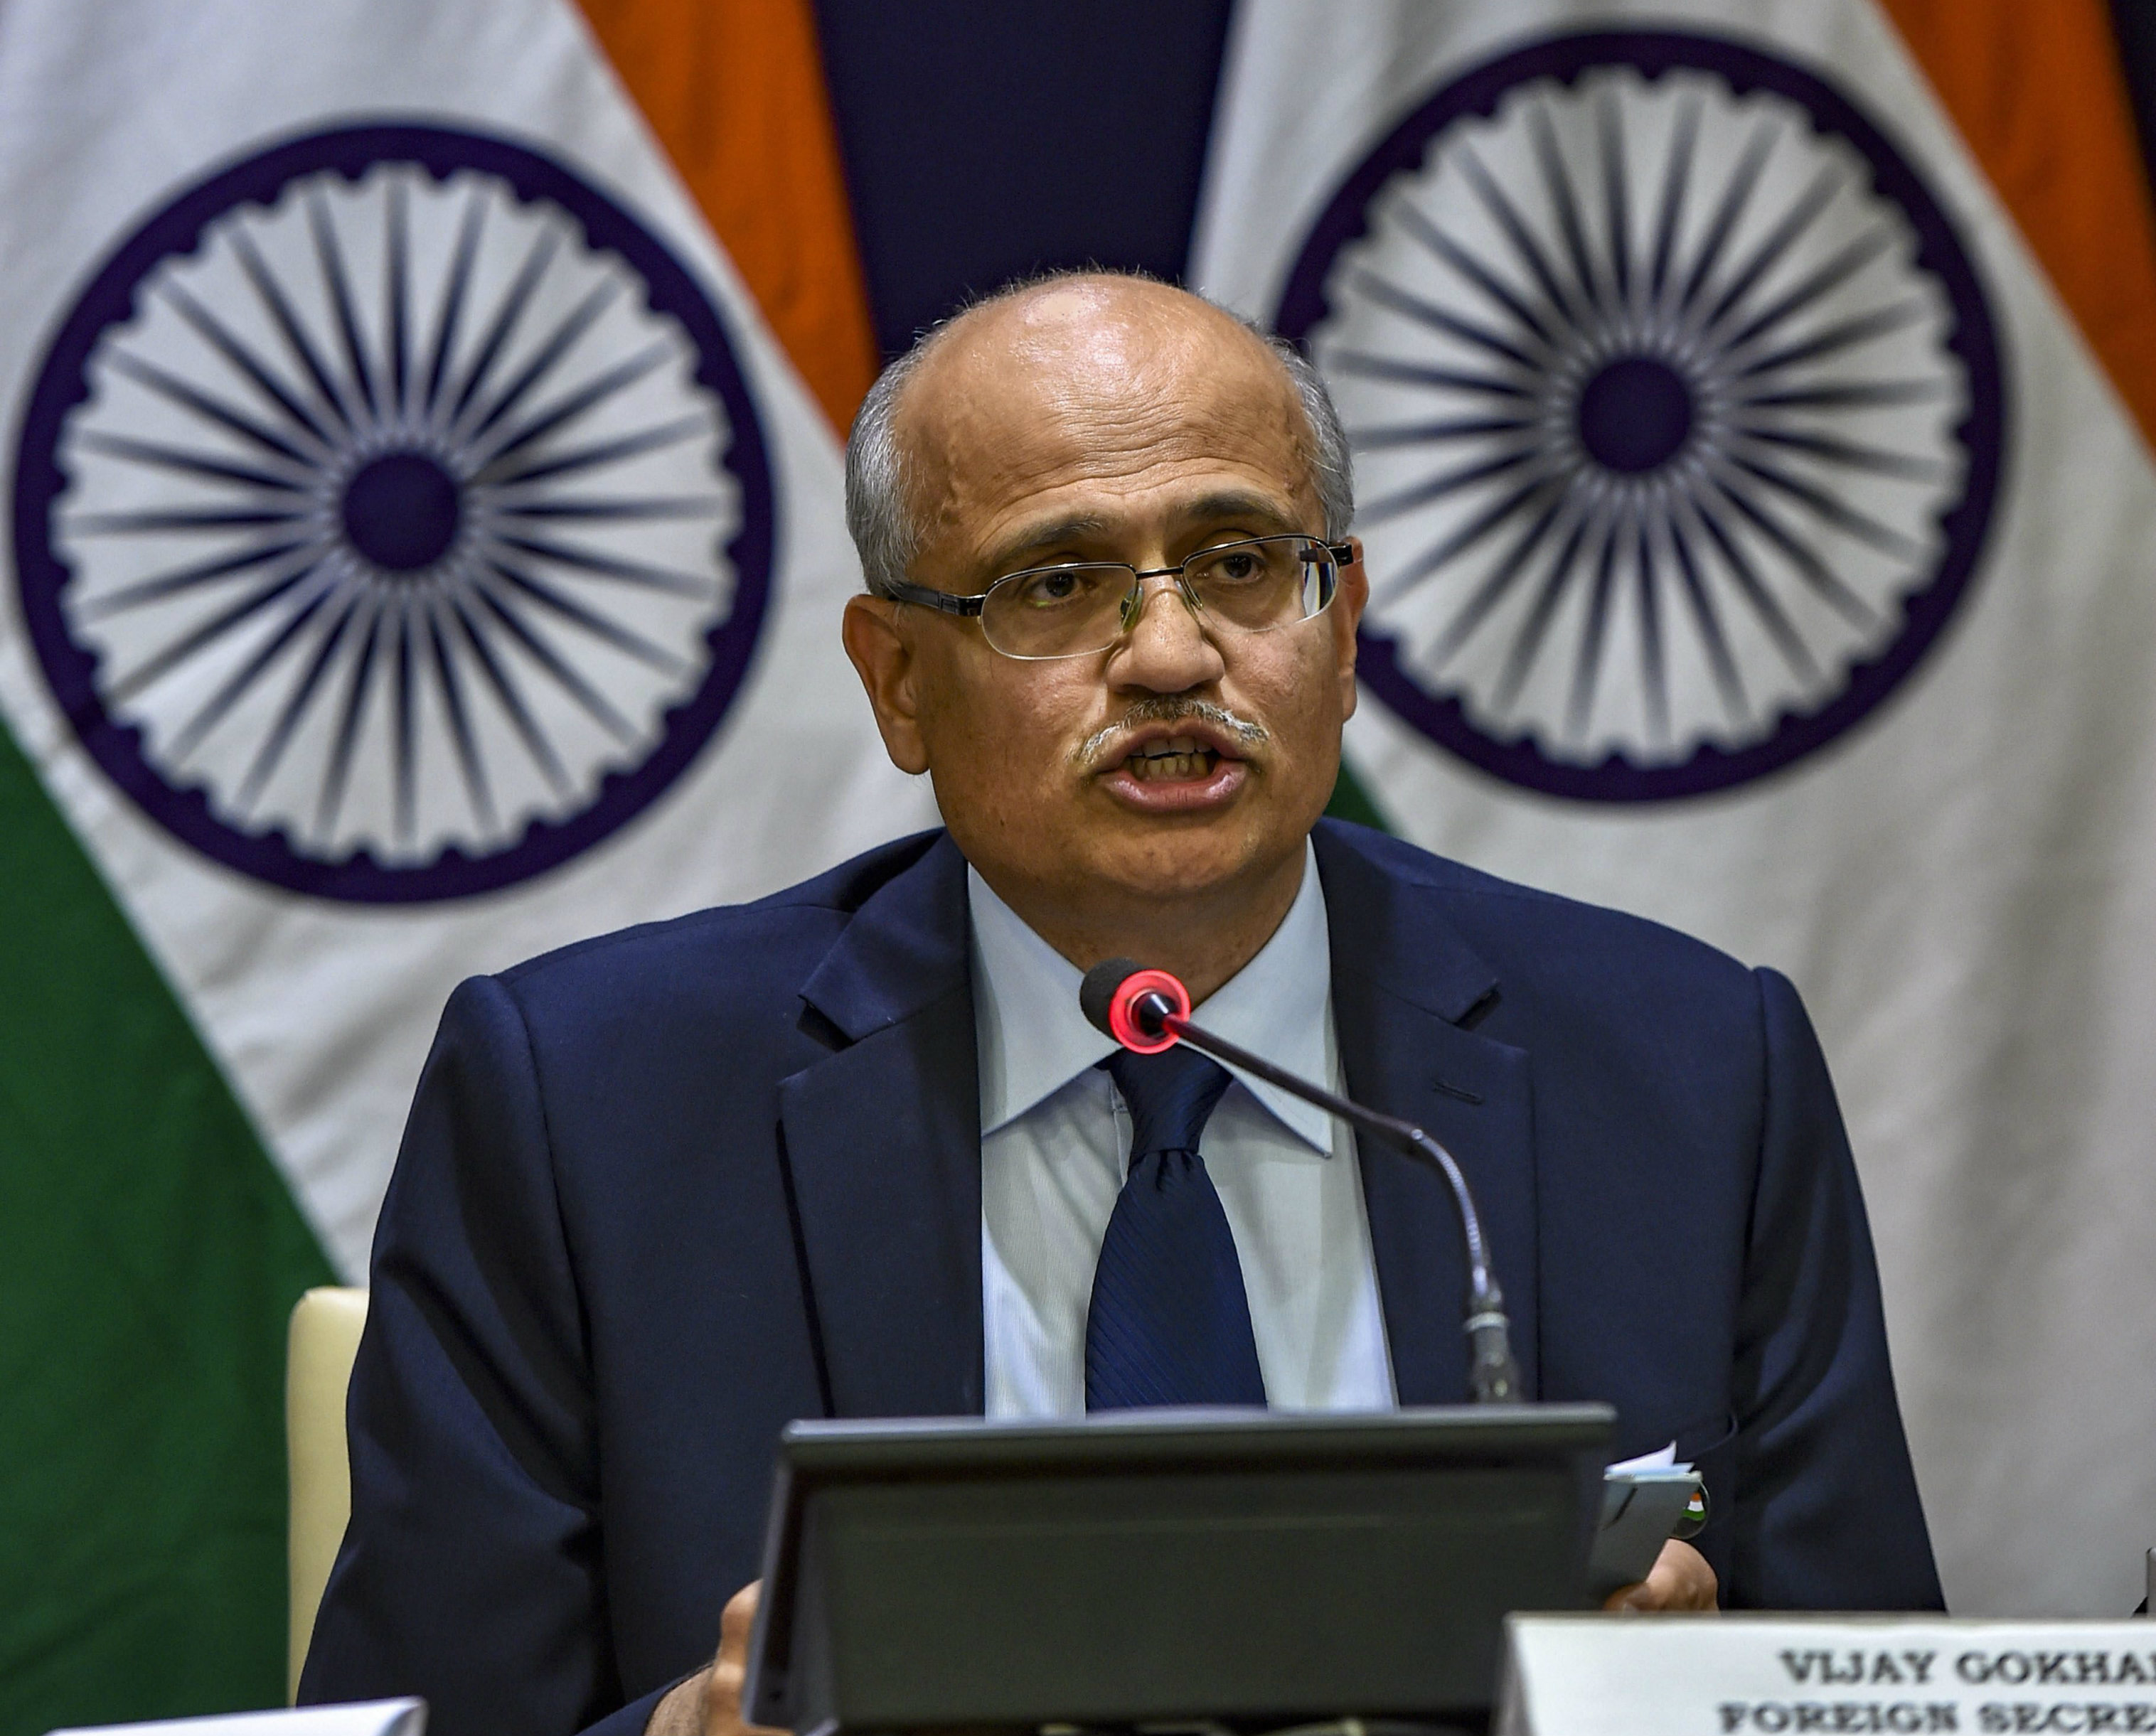 Foreign secretary Vijay Gokhale briefs the media in New Delhi on the airstrike on Tuesday.